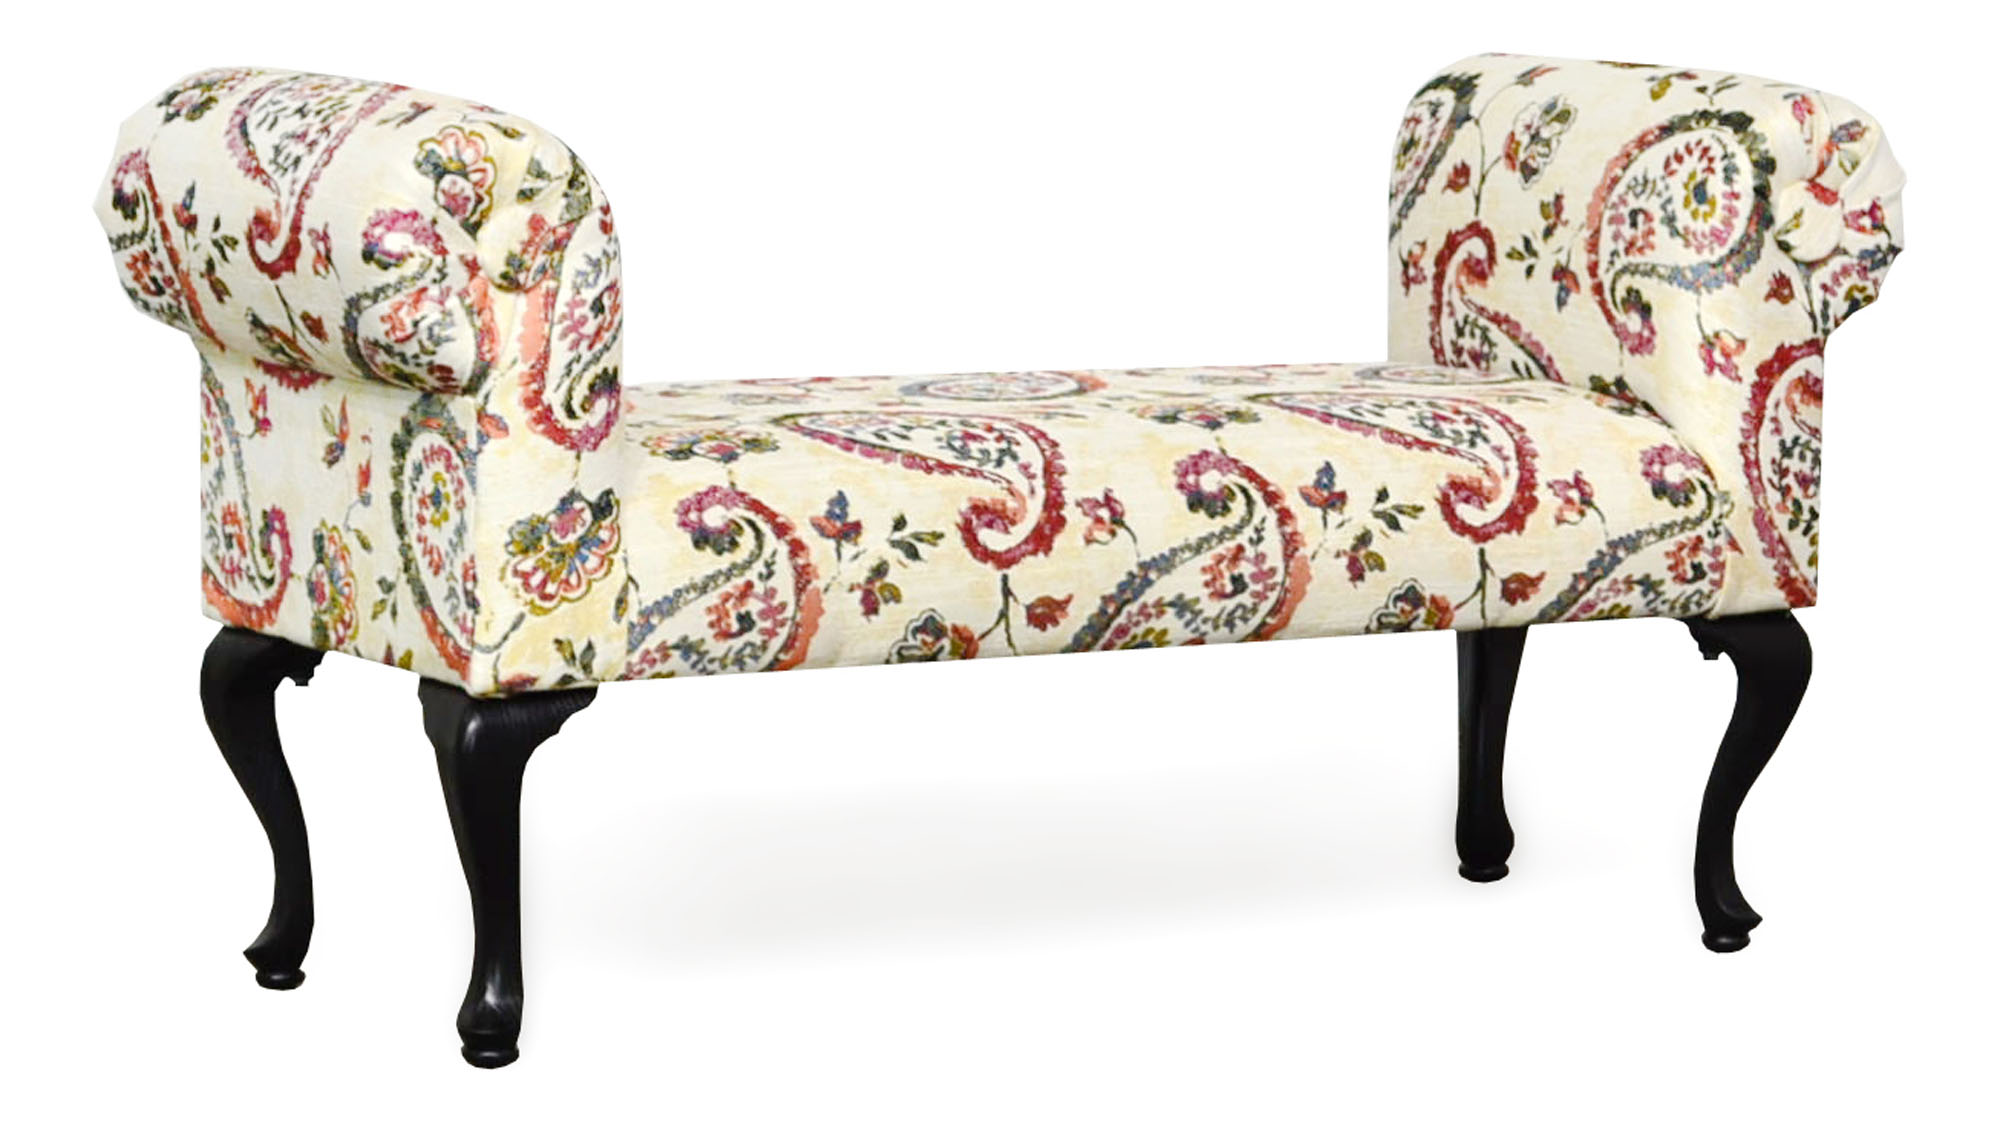 4040 Penelope Bench: Choice of Colors - NEW Colors $109.9